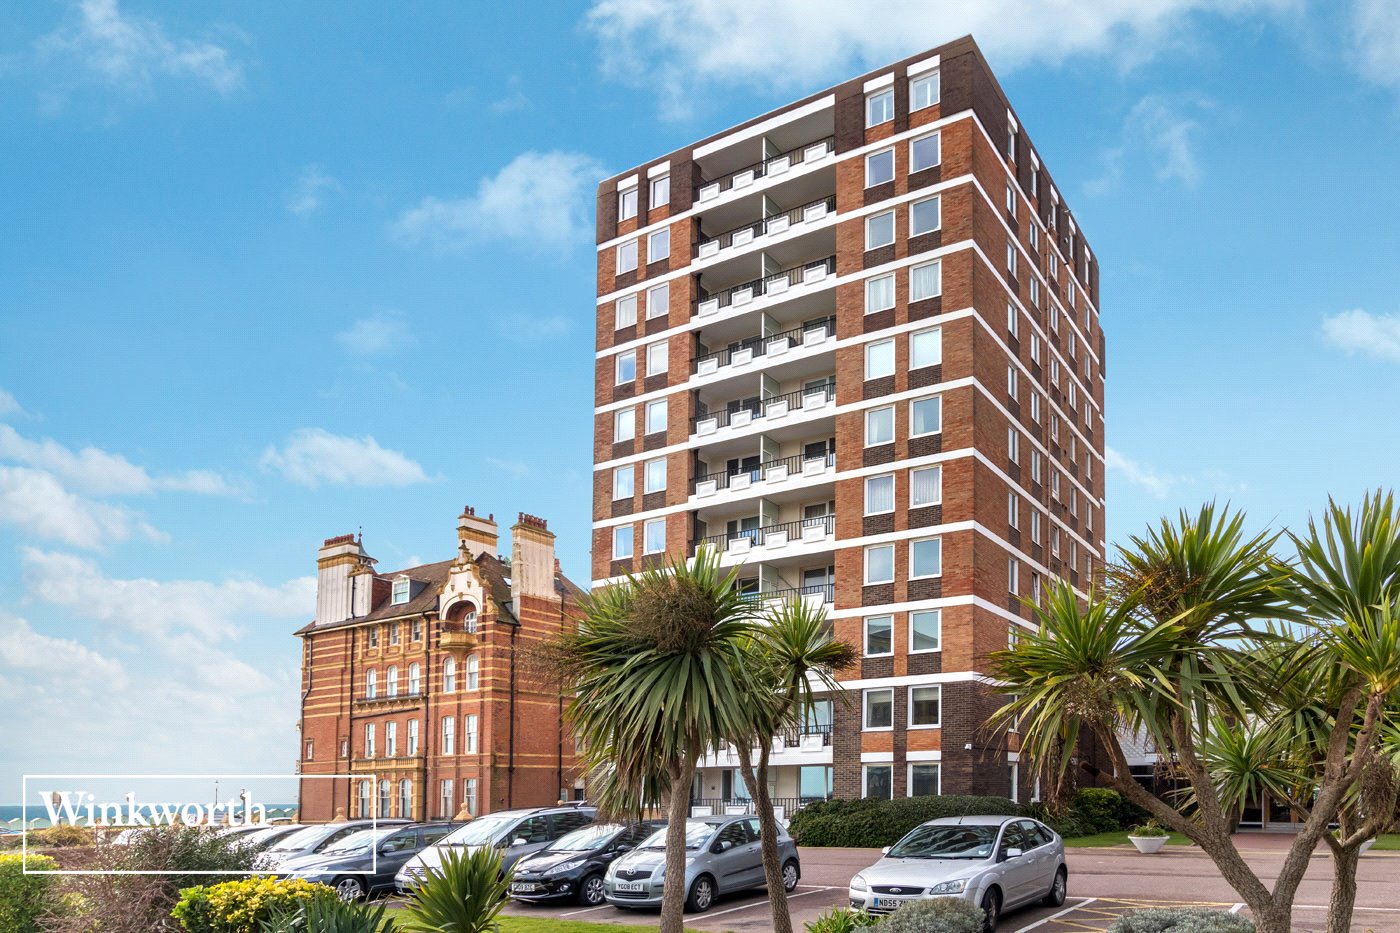 Ashley Court, Grand Avenue, Hove, East Sussex, BN3